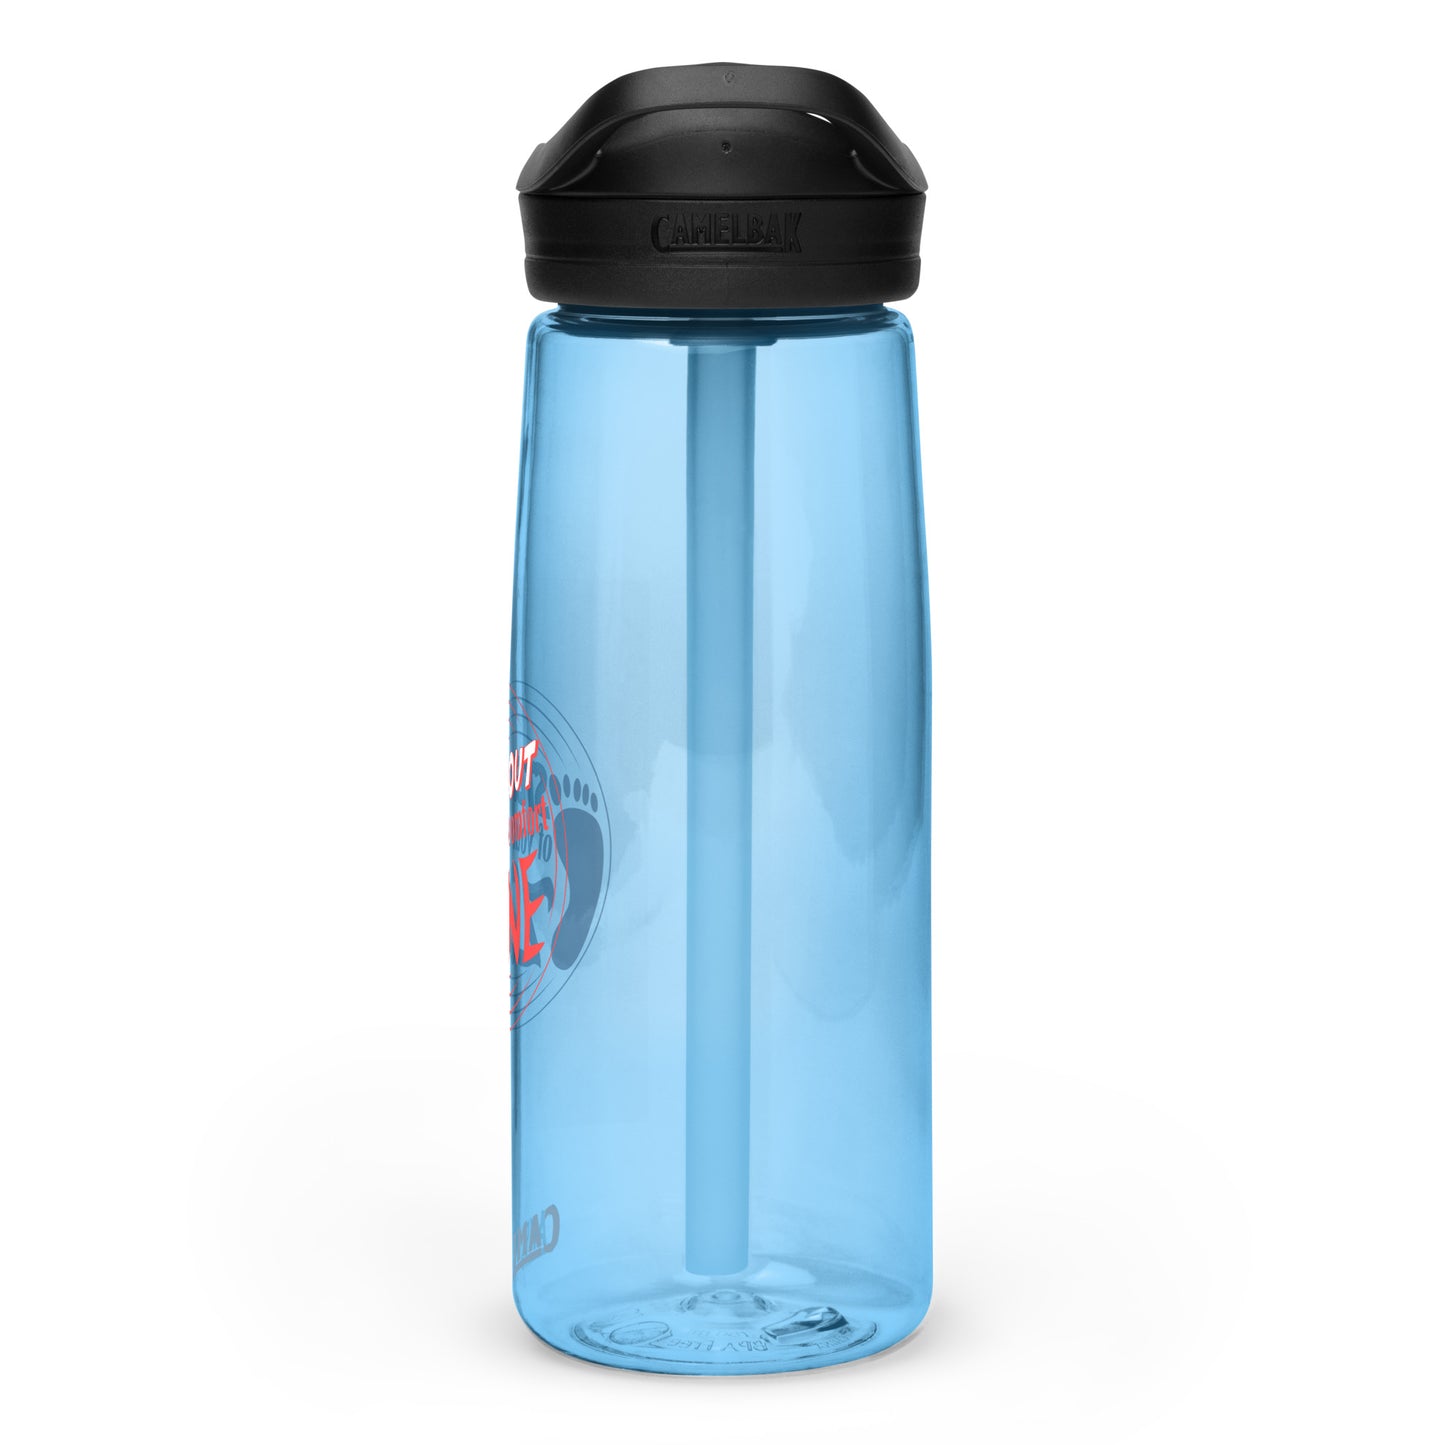 Sports water bottle Step Out Of Your Comfort Zone